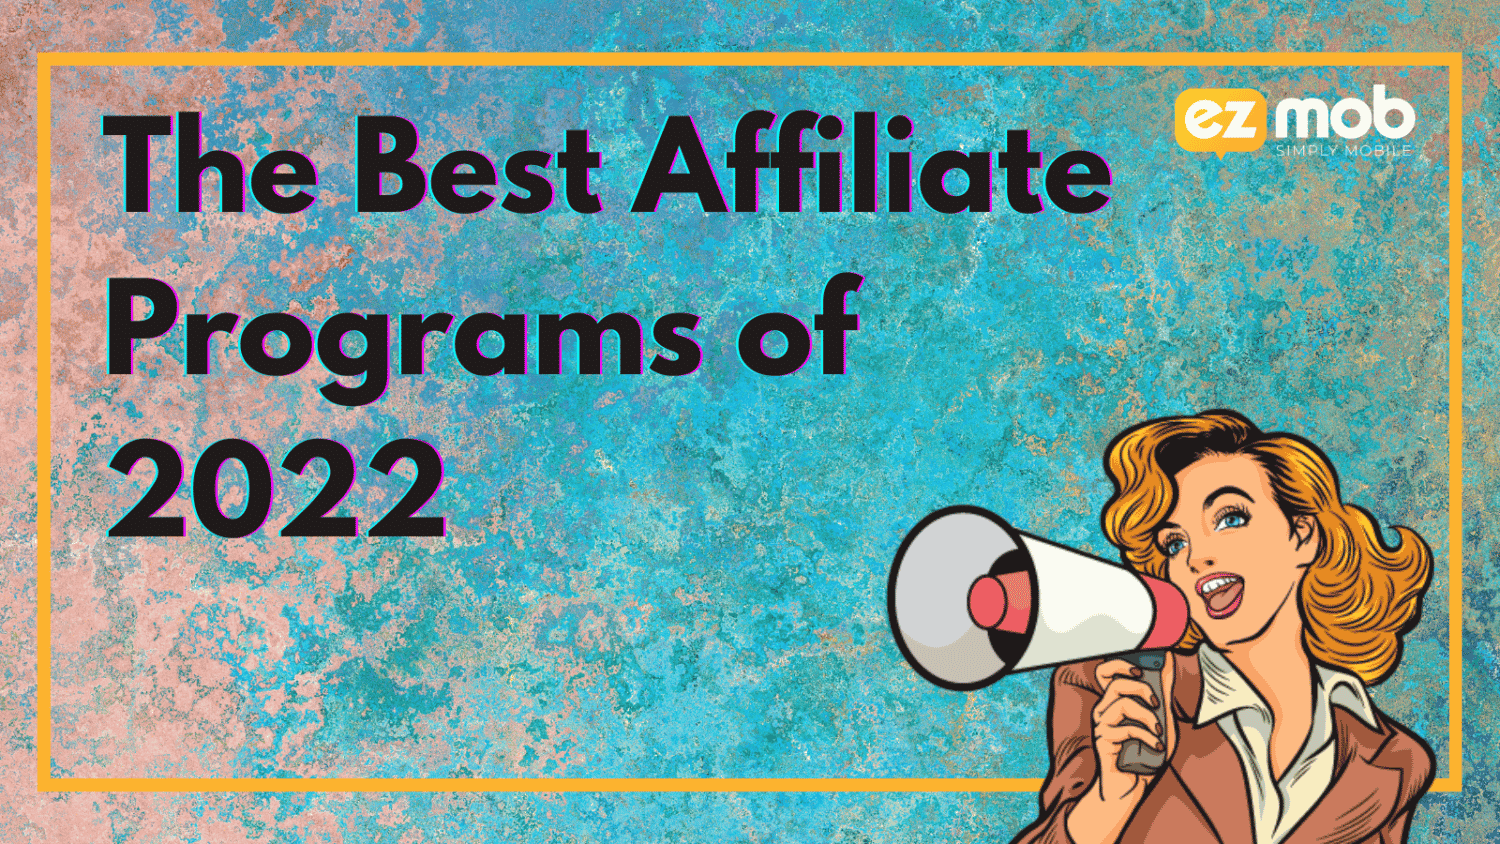 best affiliate networks